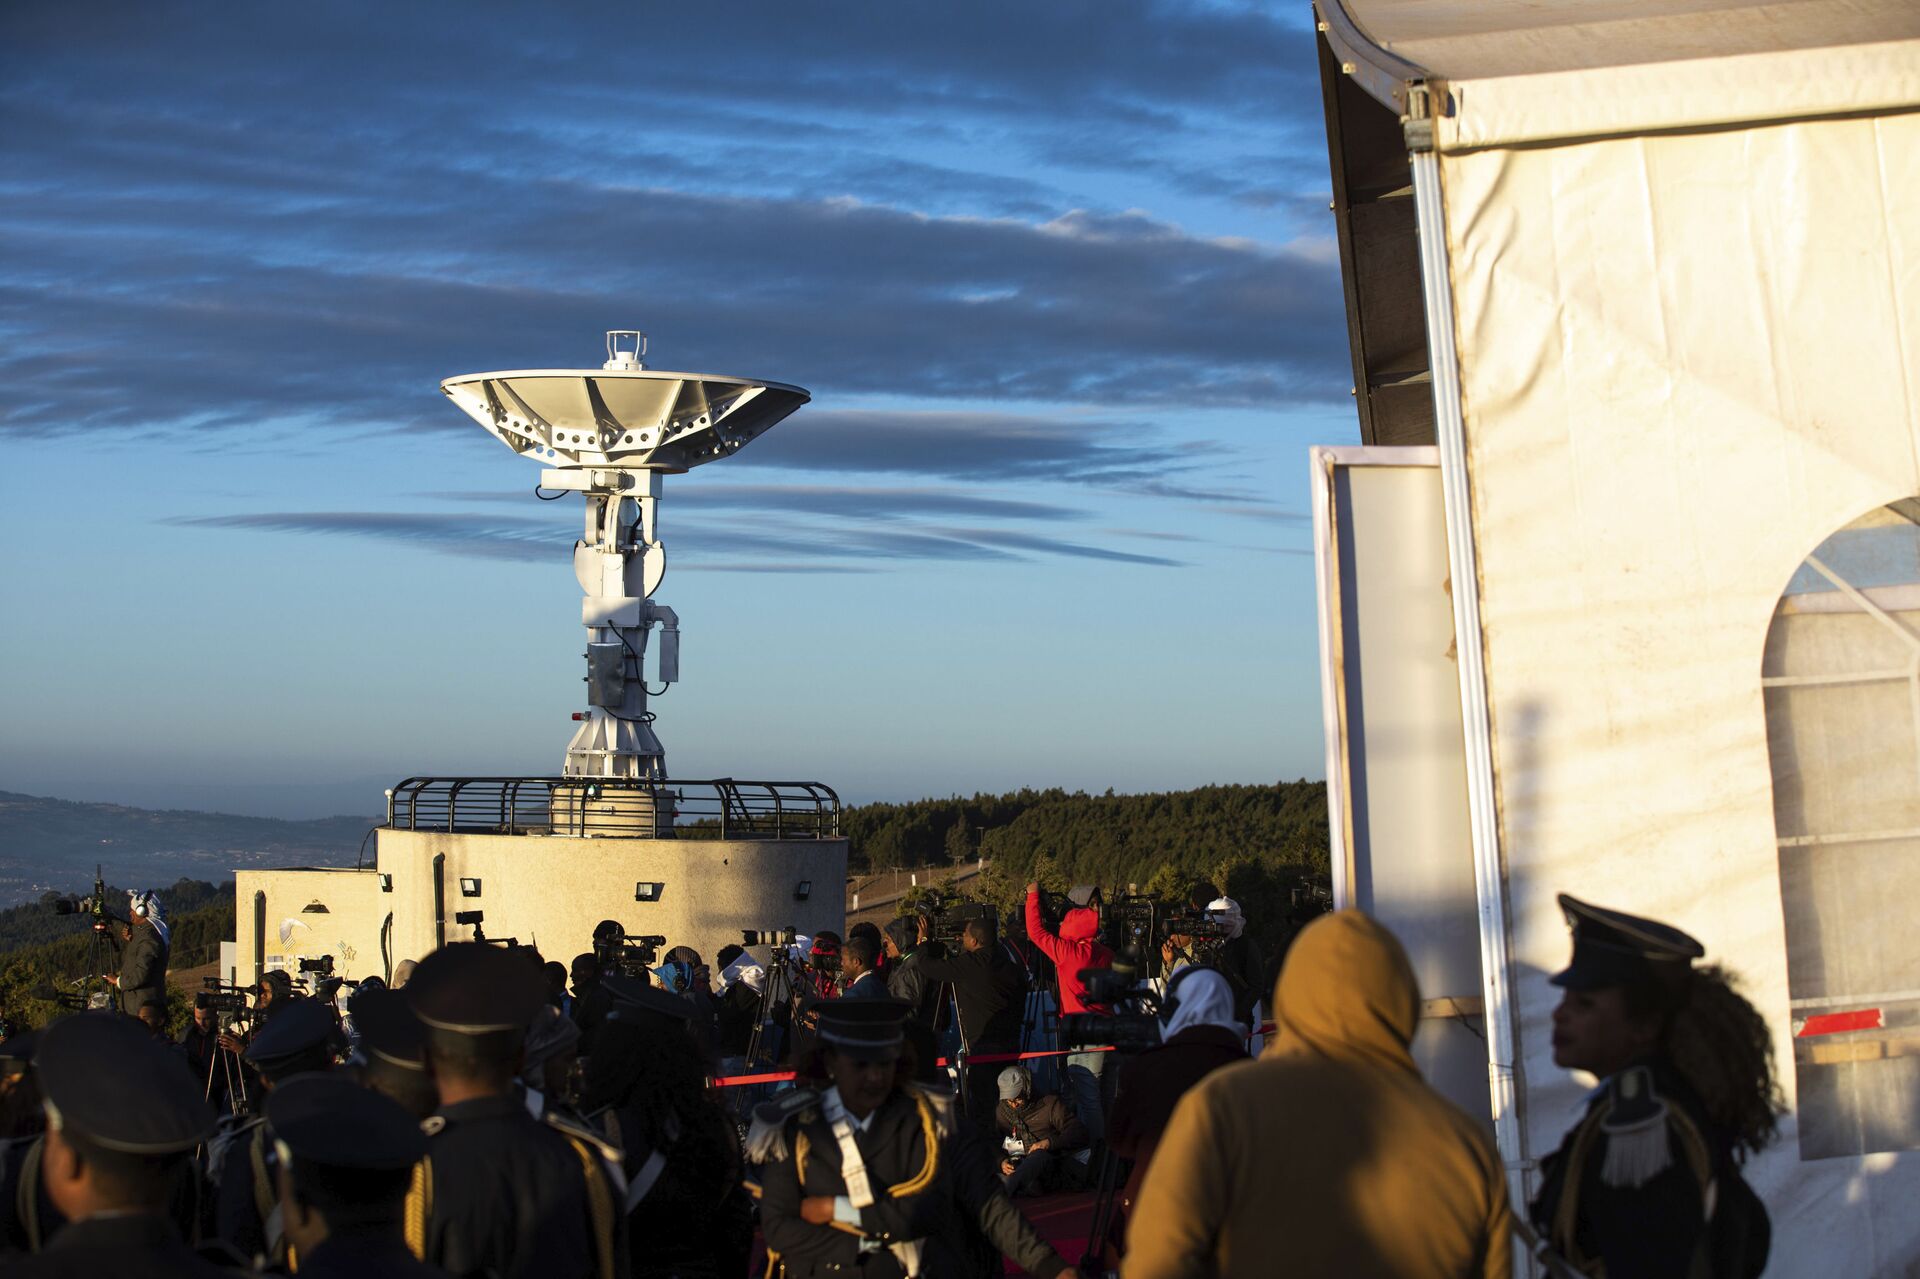 People attend the launch of Ethiopia's first micro-satellite (ETRSS-1) at the Entoto Observatory on the outskirts of the capital Addis Ababa, Friday Dec. 20, 2019 - Sputnik International, 1920, 23.09.2021